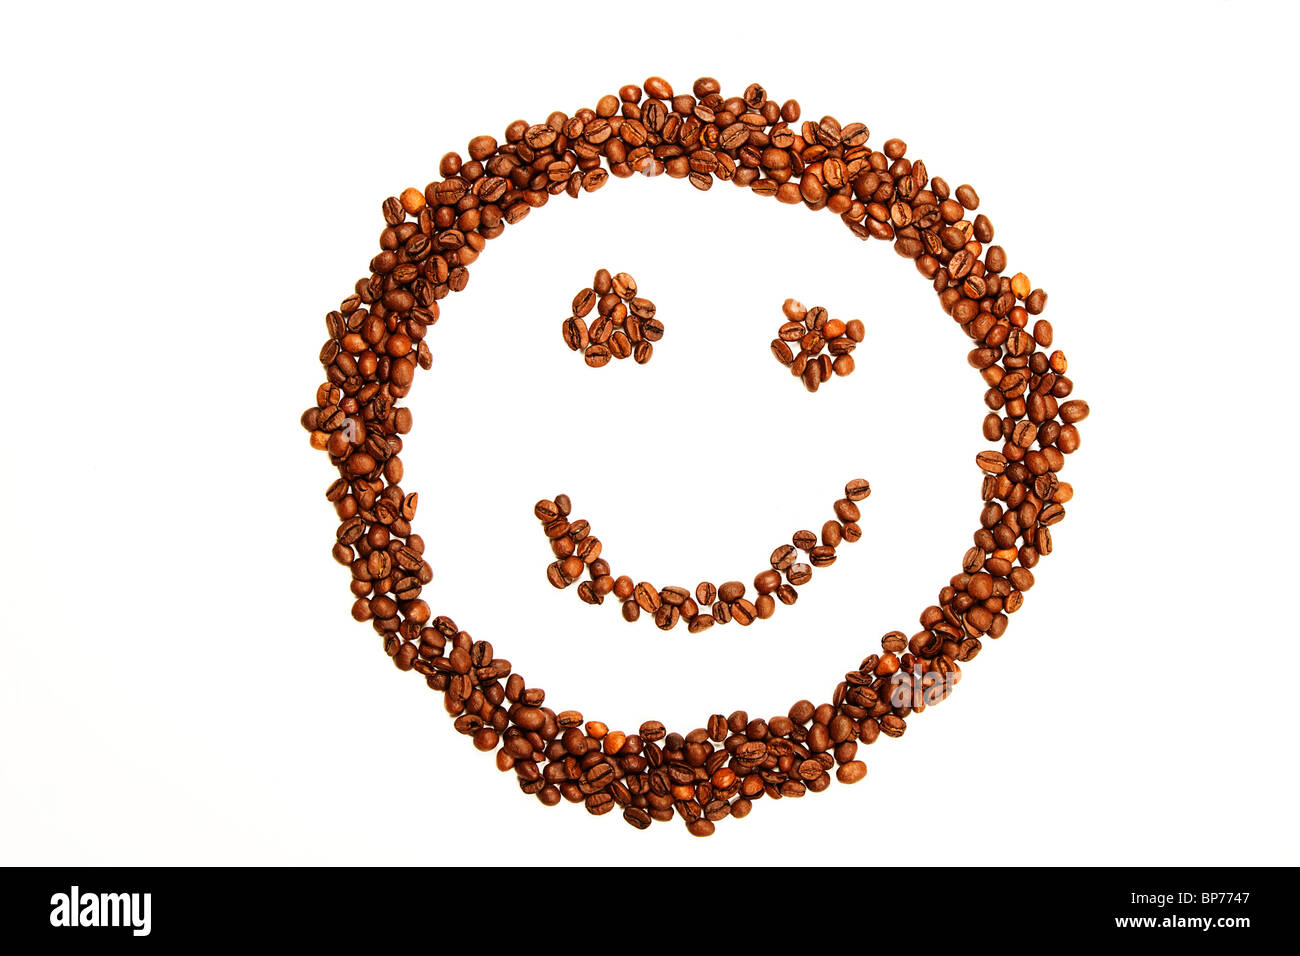 laughing smiley made of coffee beans on white background Stock Photo